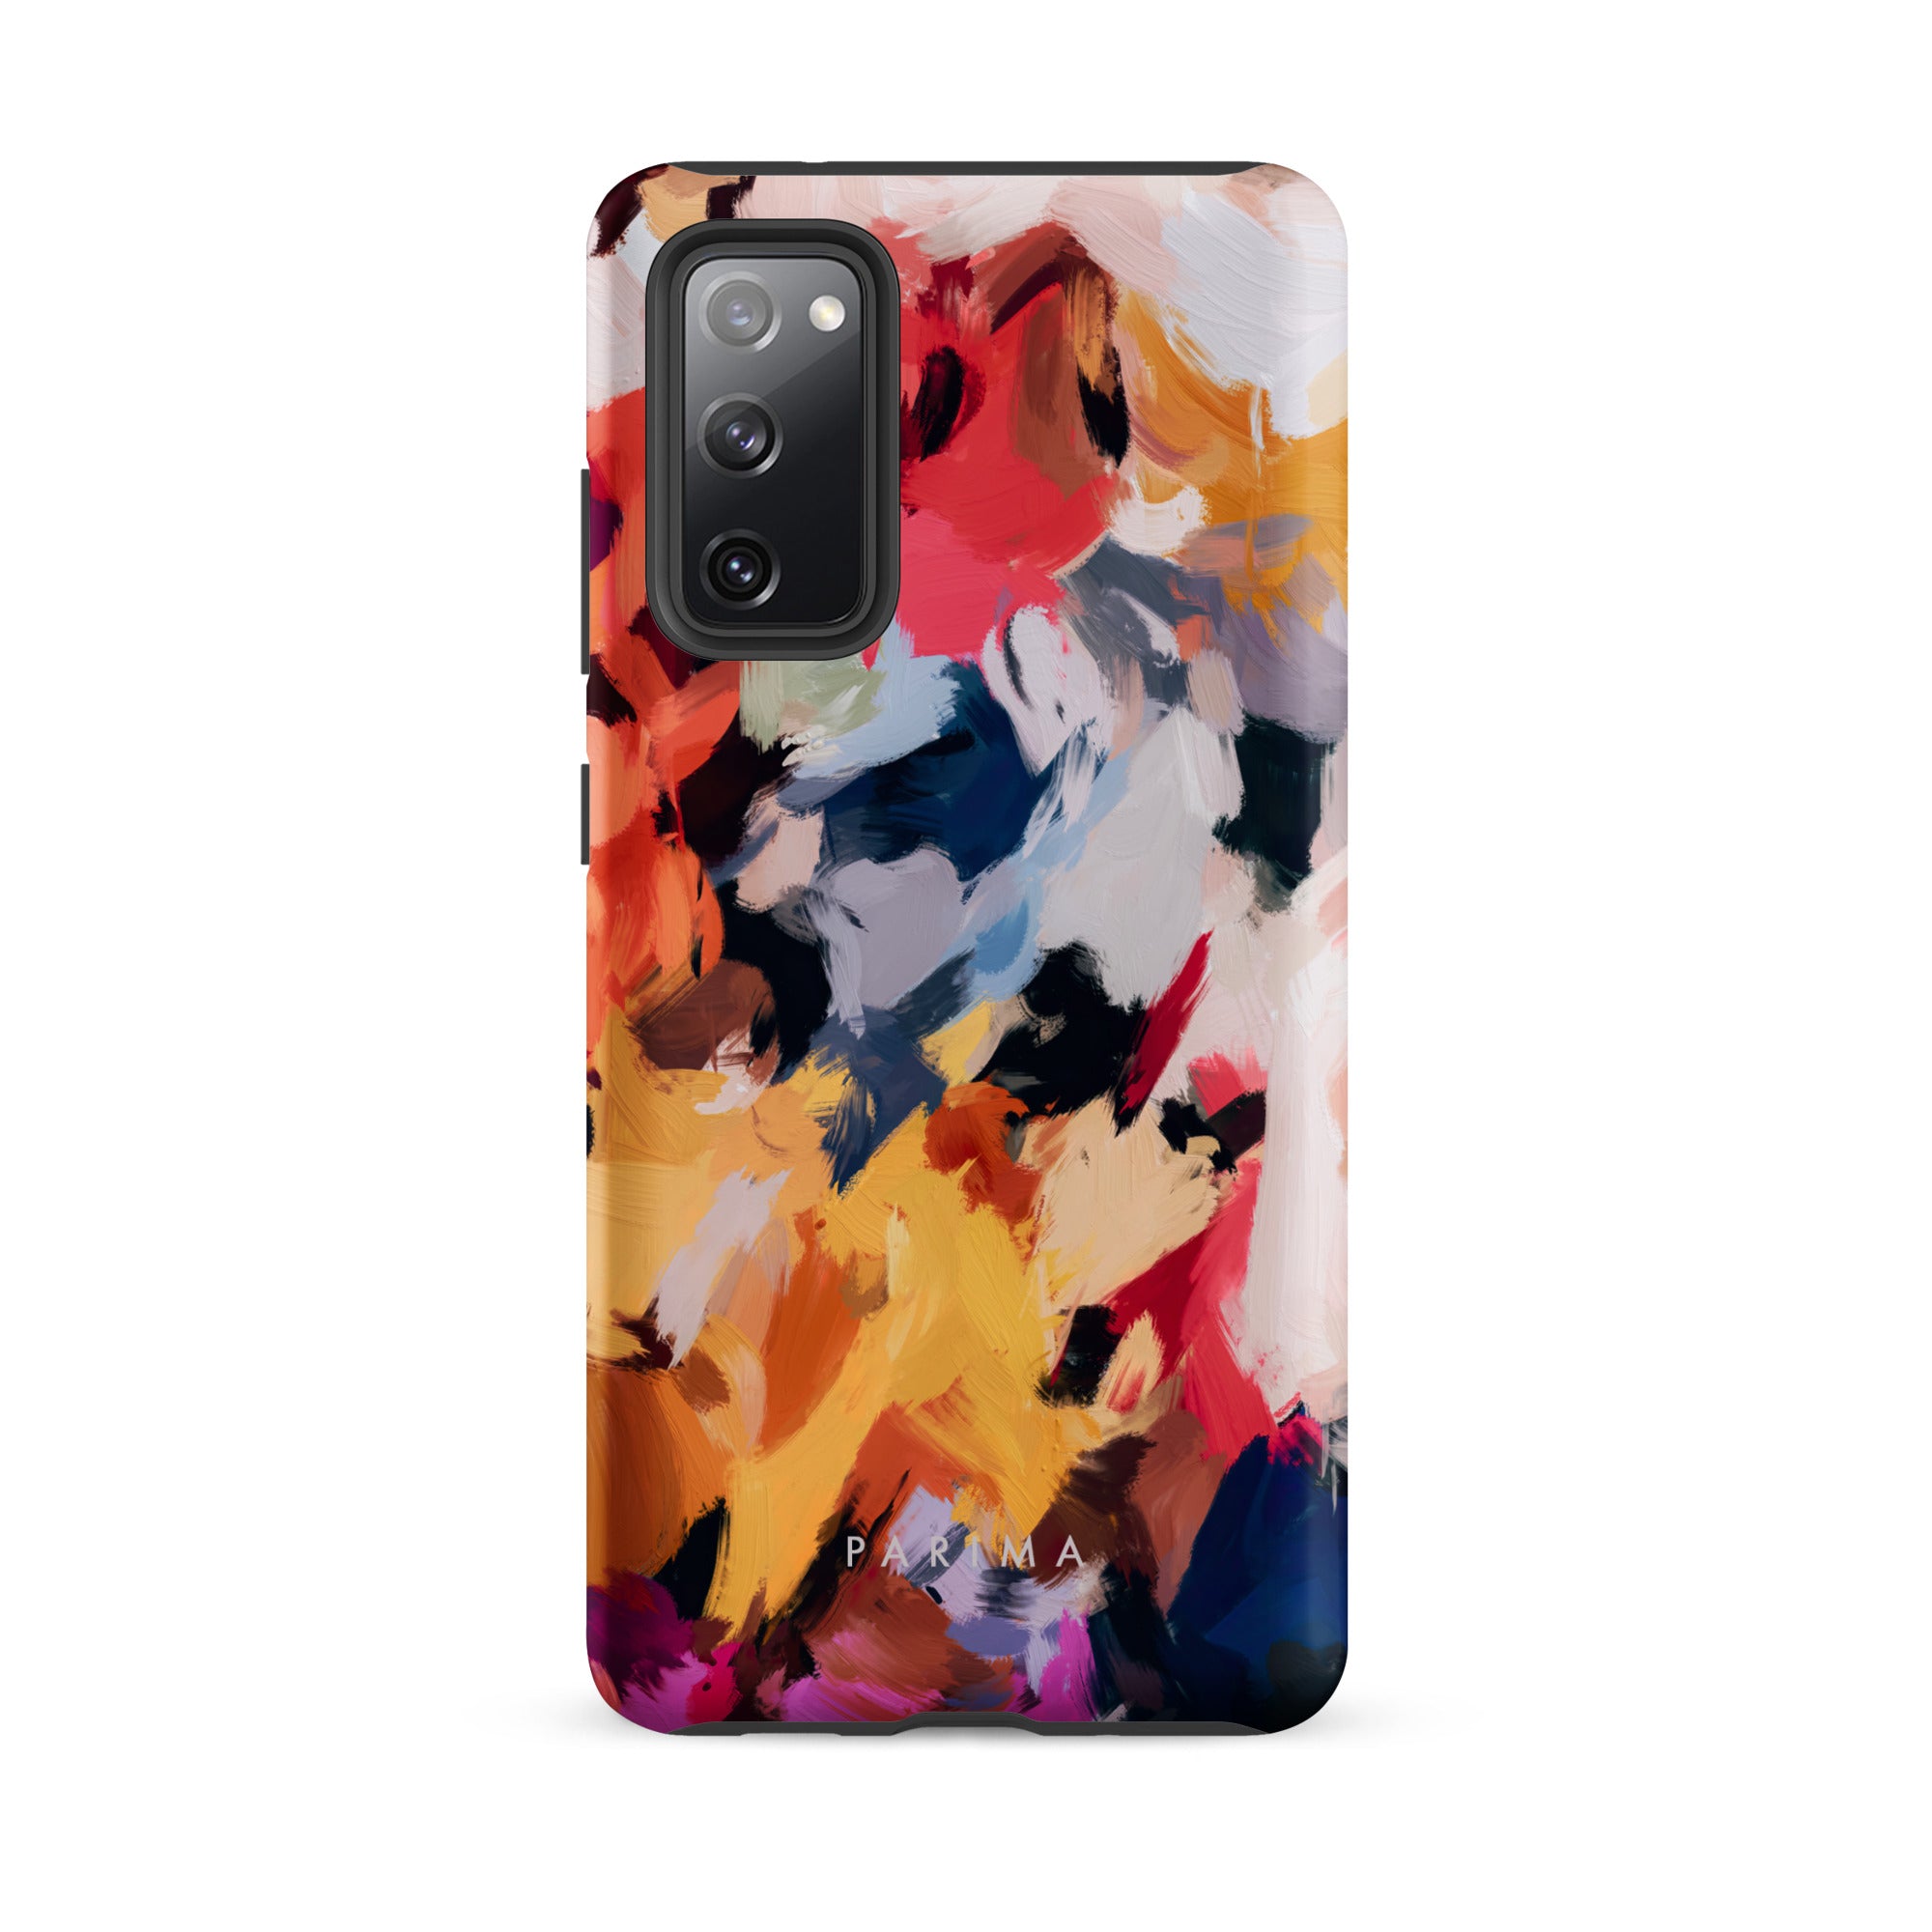 Wilde, blue and yellow multicolor abstract art on Samsung Galaxy S20 FE tough case by Parima Studio